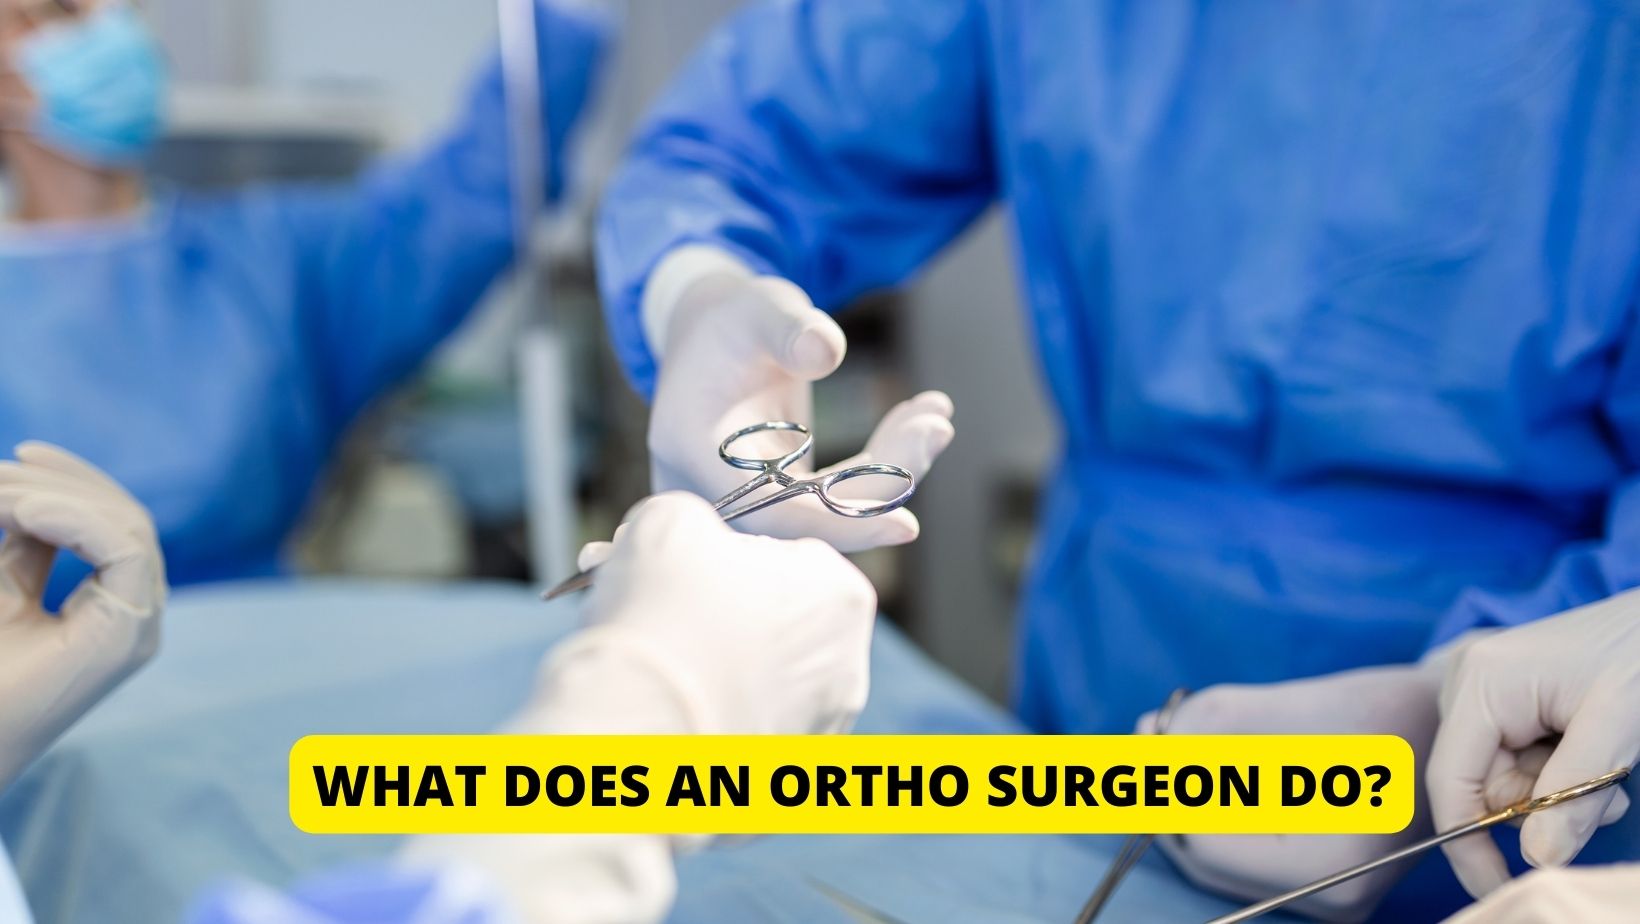 What Does an Ortho Surgeon Do?